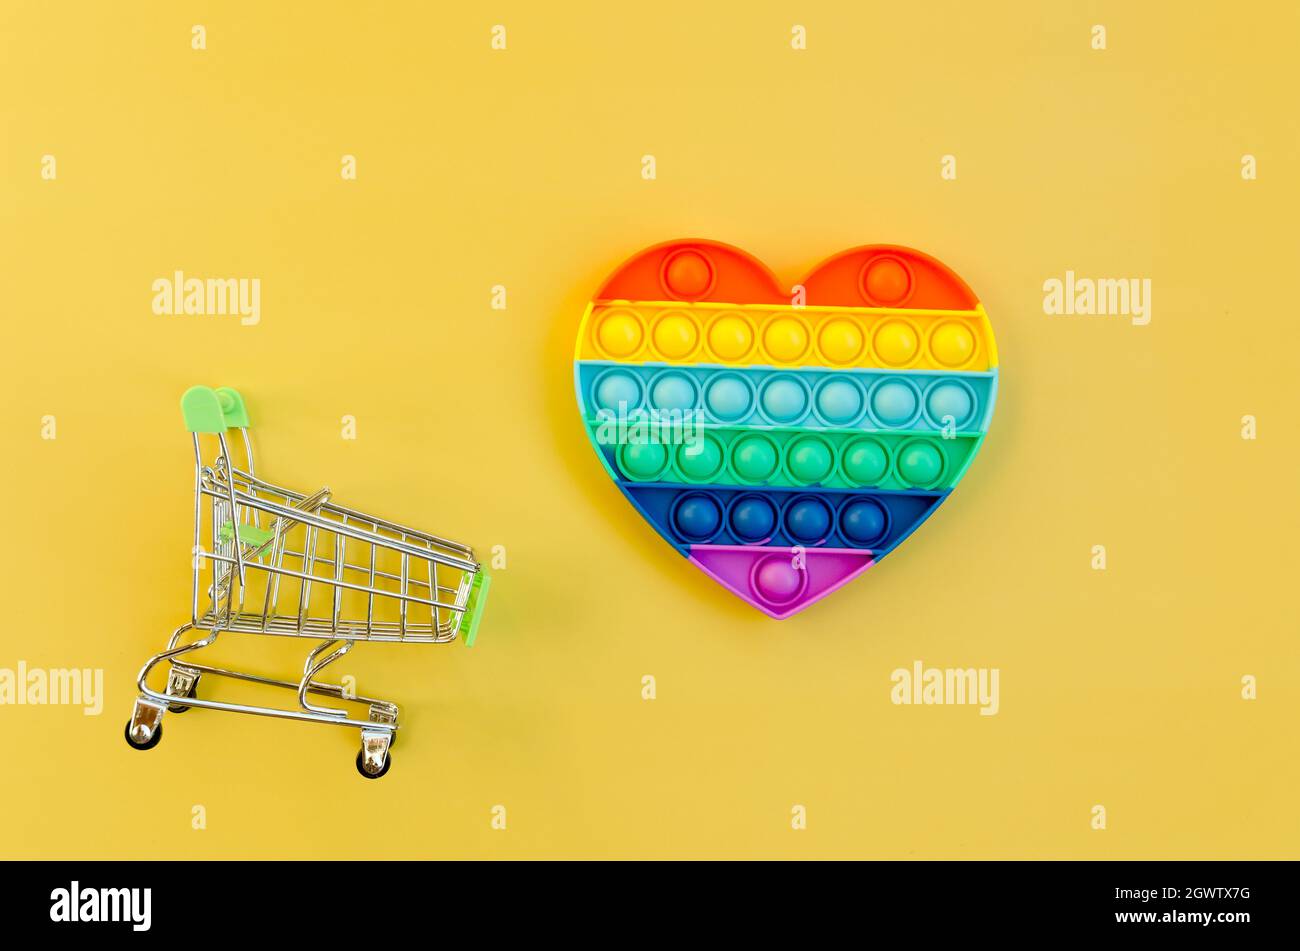 Top View Of Anti Stress Sensory Toy Pop It Rainbow Heart On Yellow Background. Popular, Trend Toys. Stock Photo